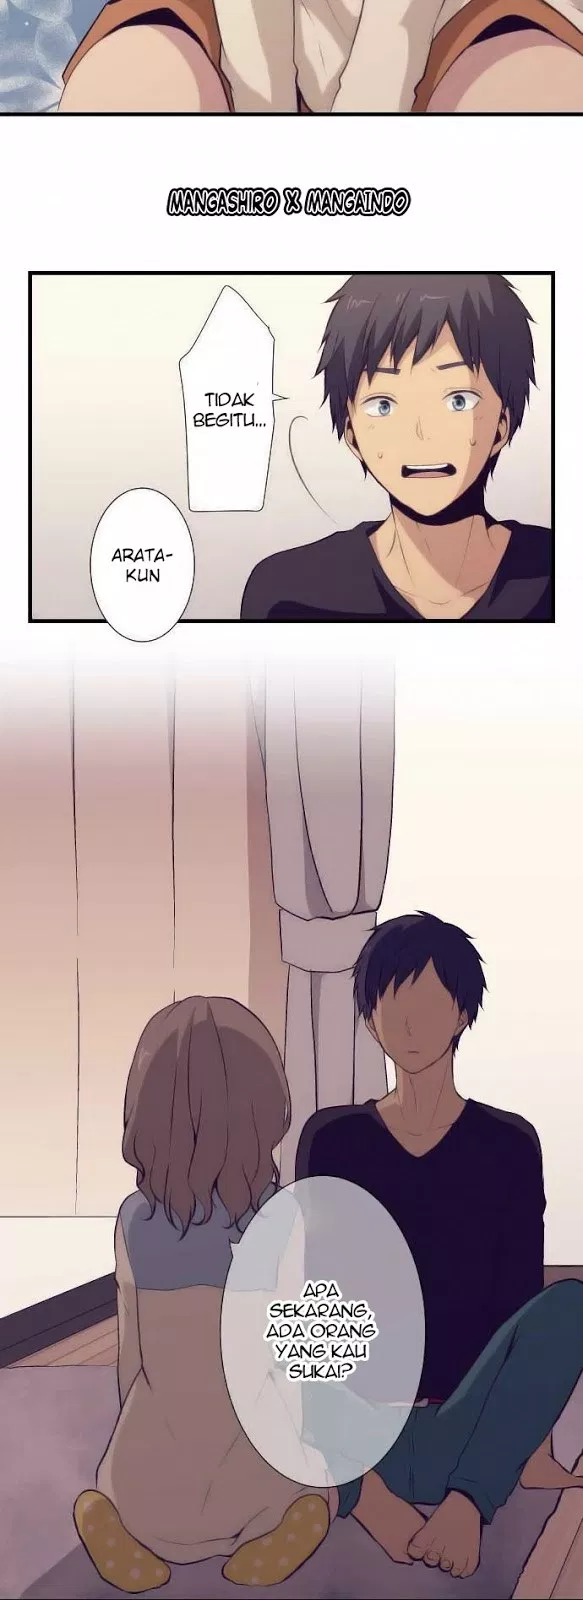 ReLIFE Chapter 51